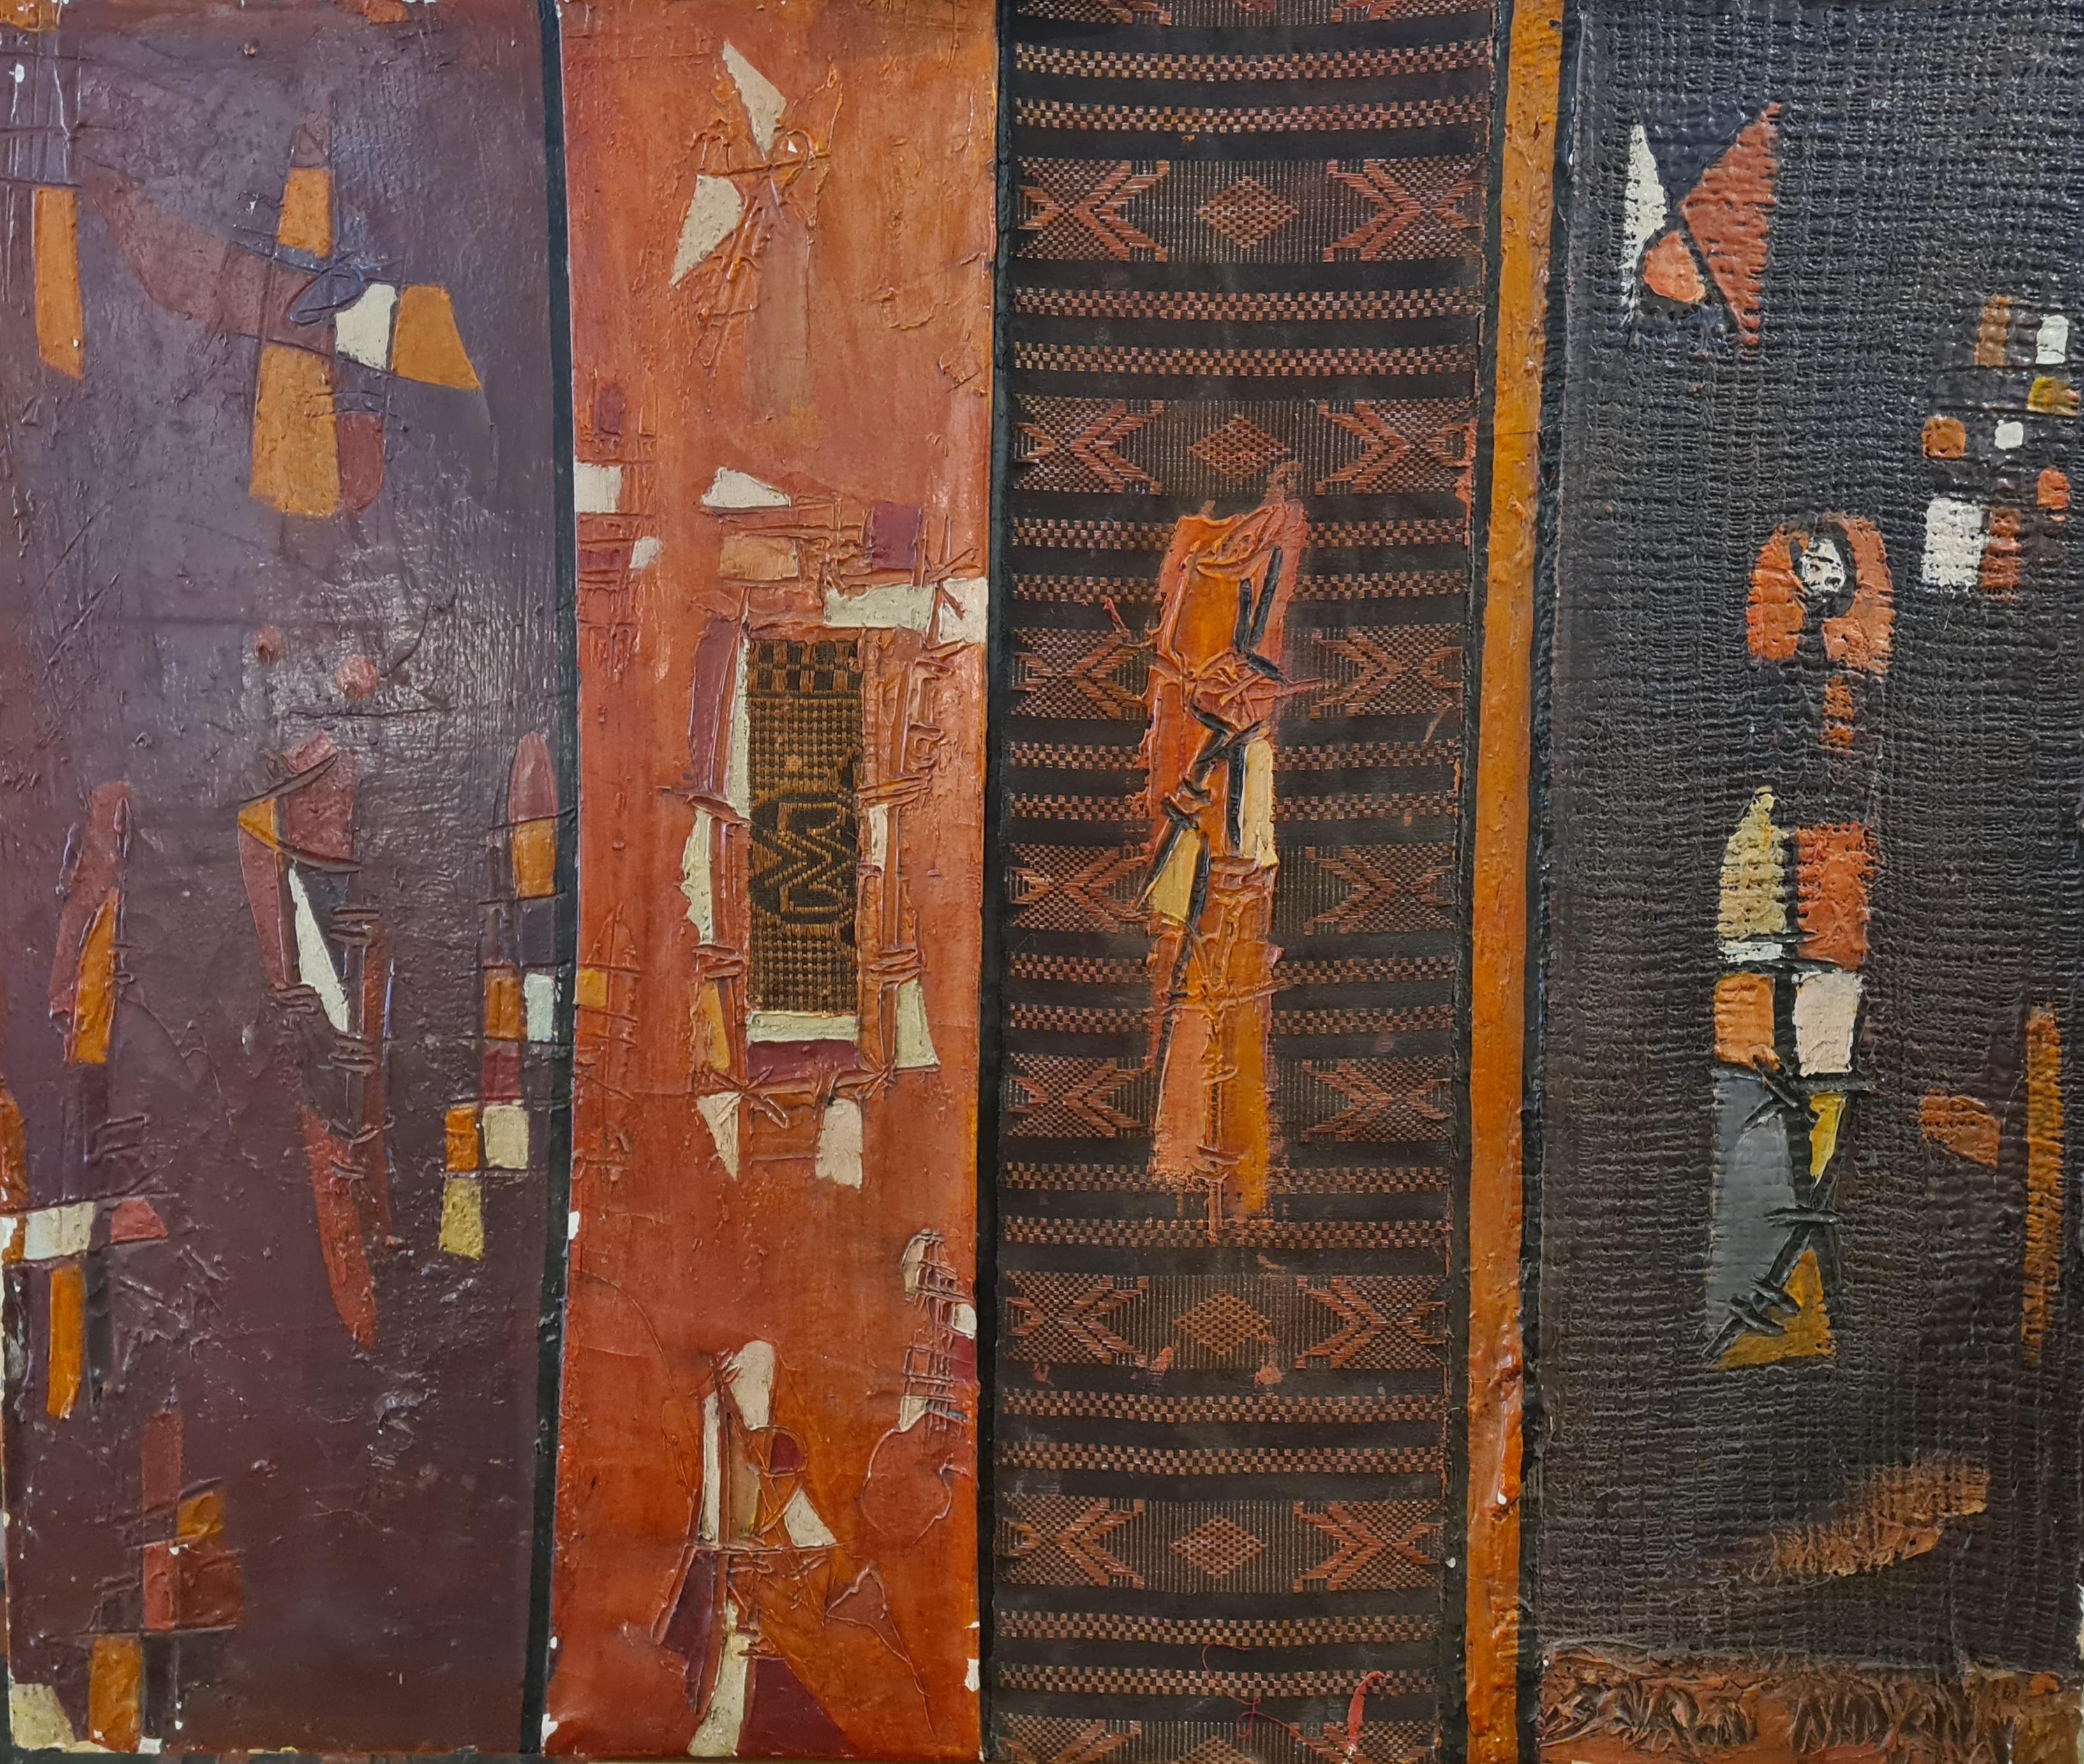 Bara Ndaw Abstract Painting - Four Panel Mixed Media Abstract Montage, African, Senegalese Outsider Art.